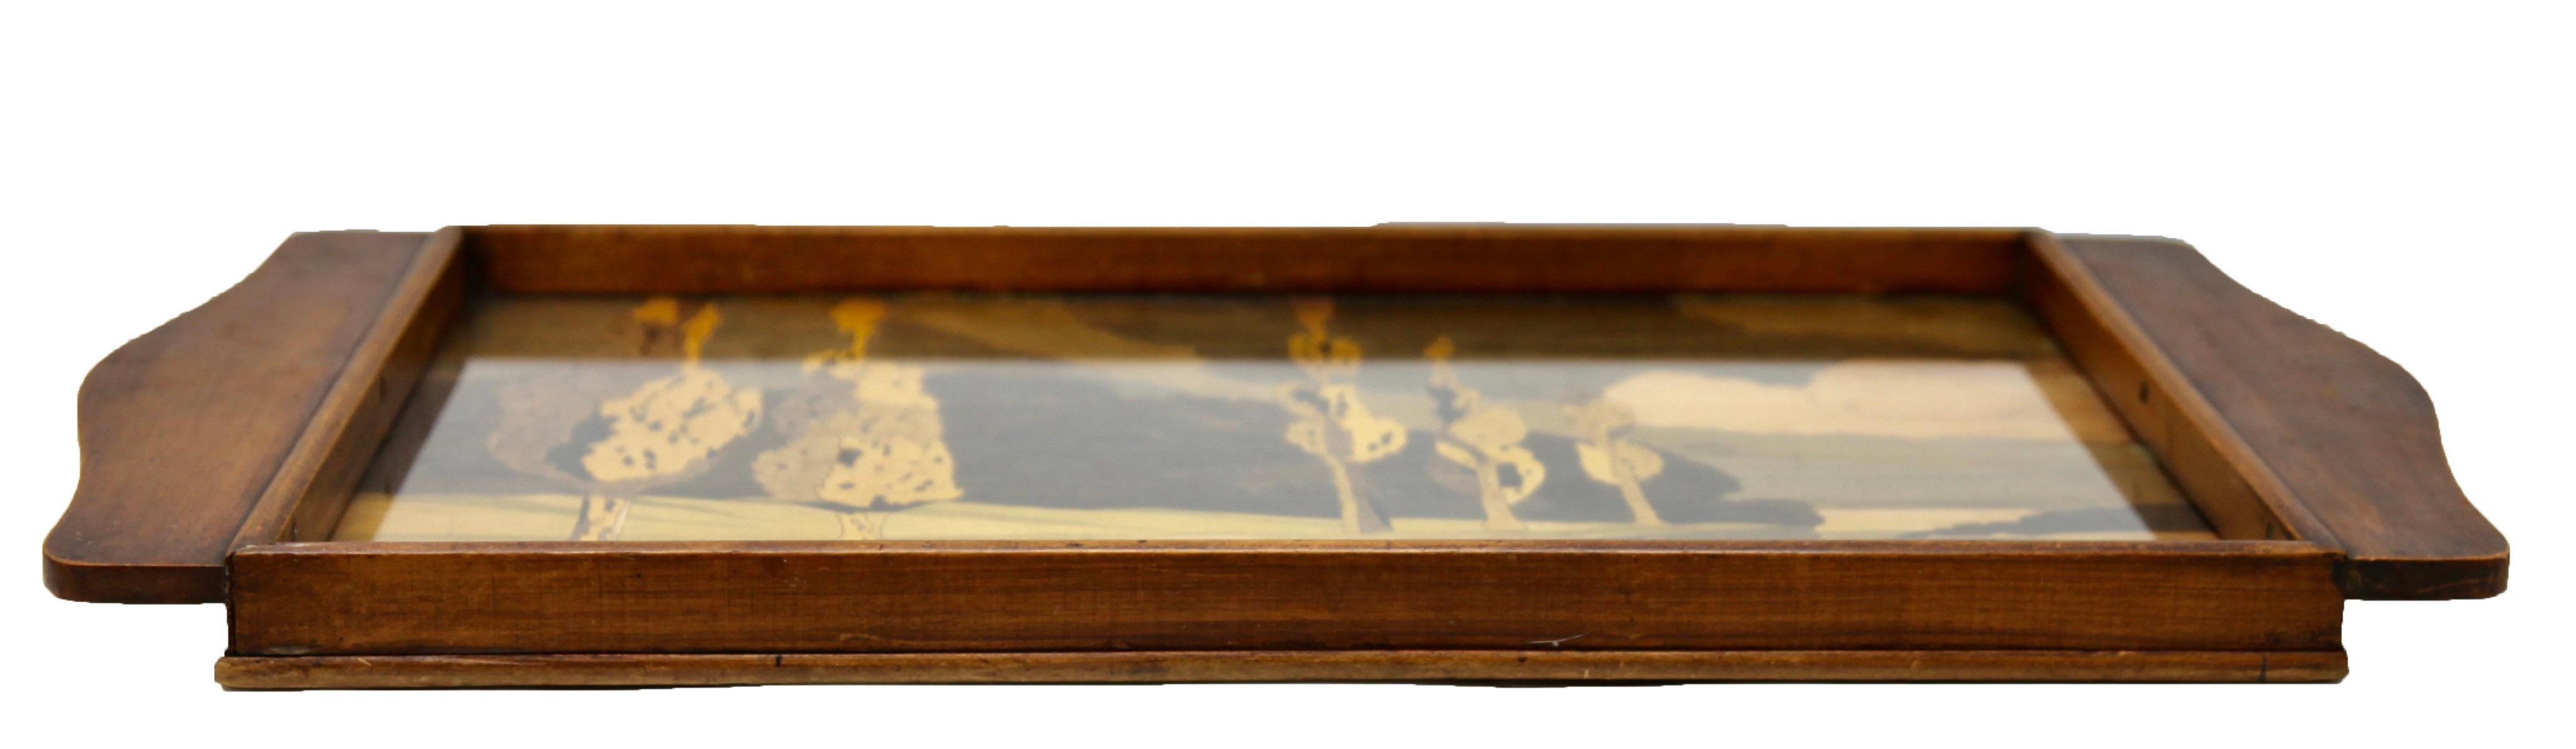 Art Nouveau Tray with Wood Panel Covert with Glass and Landscape Decoration For Sale 1